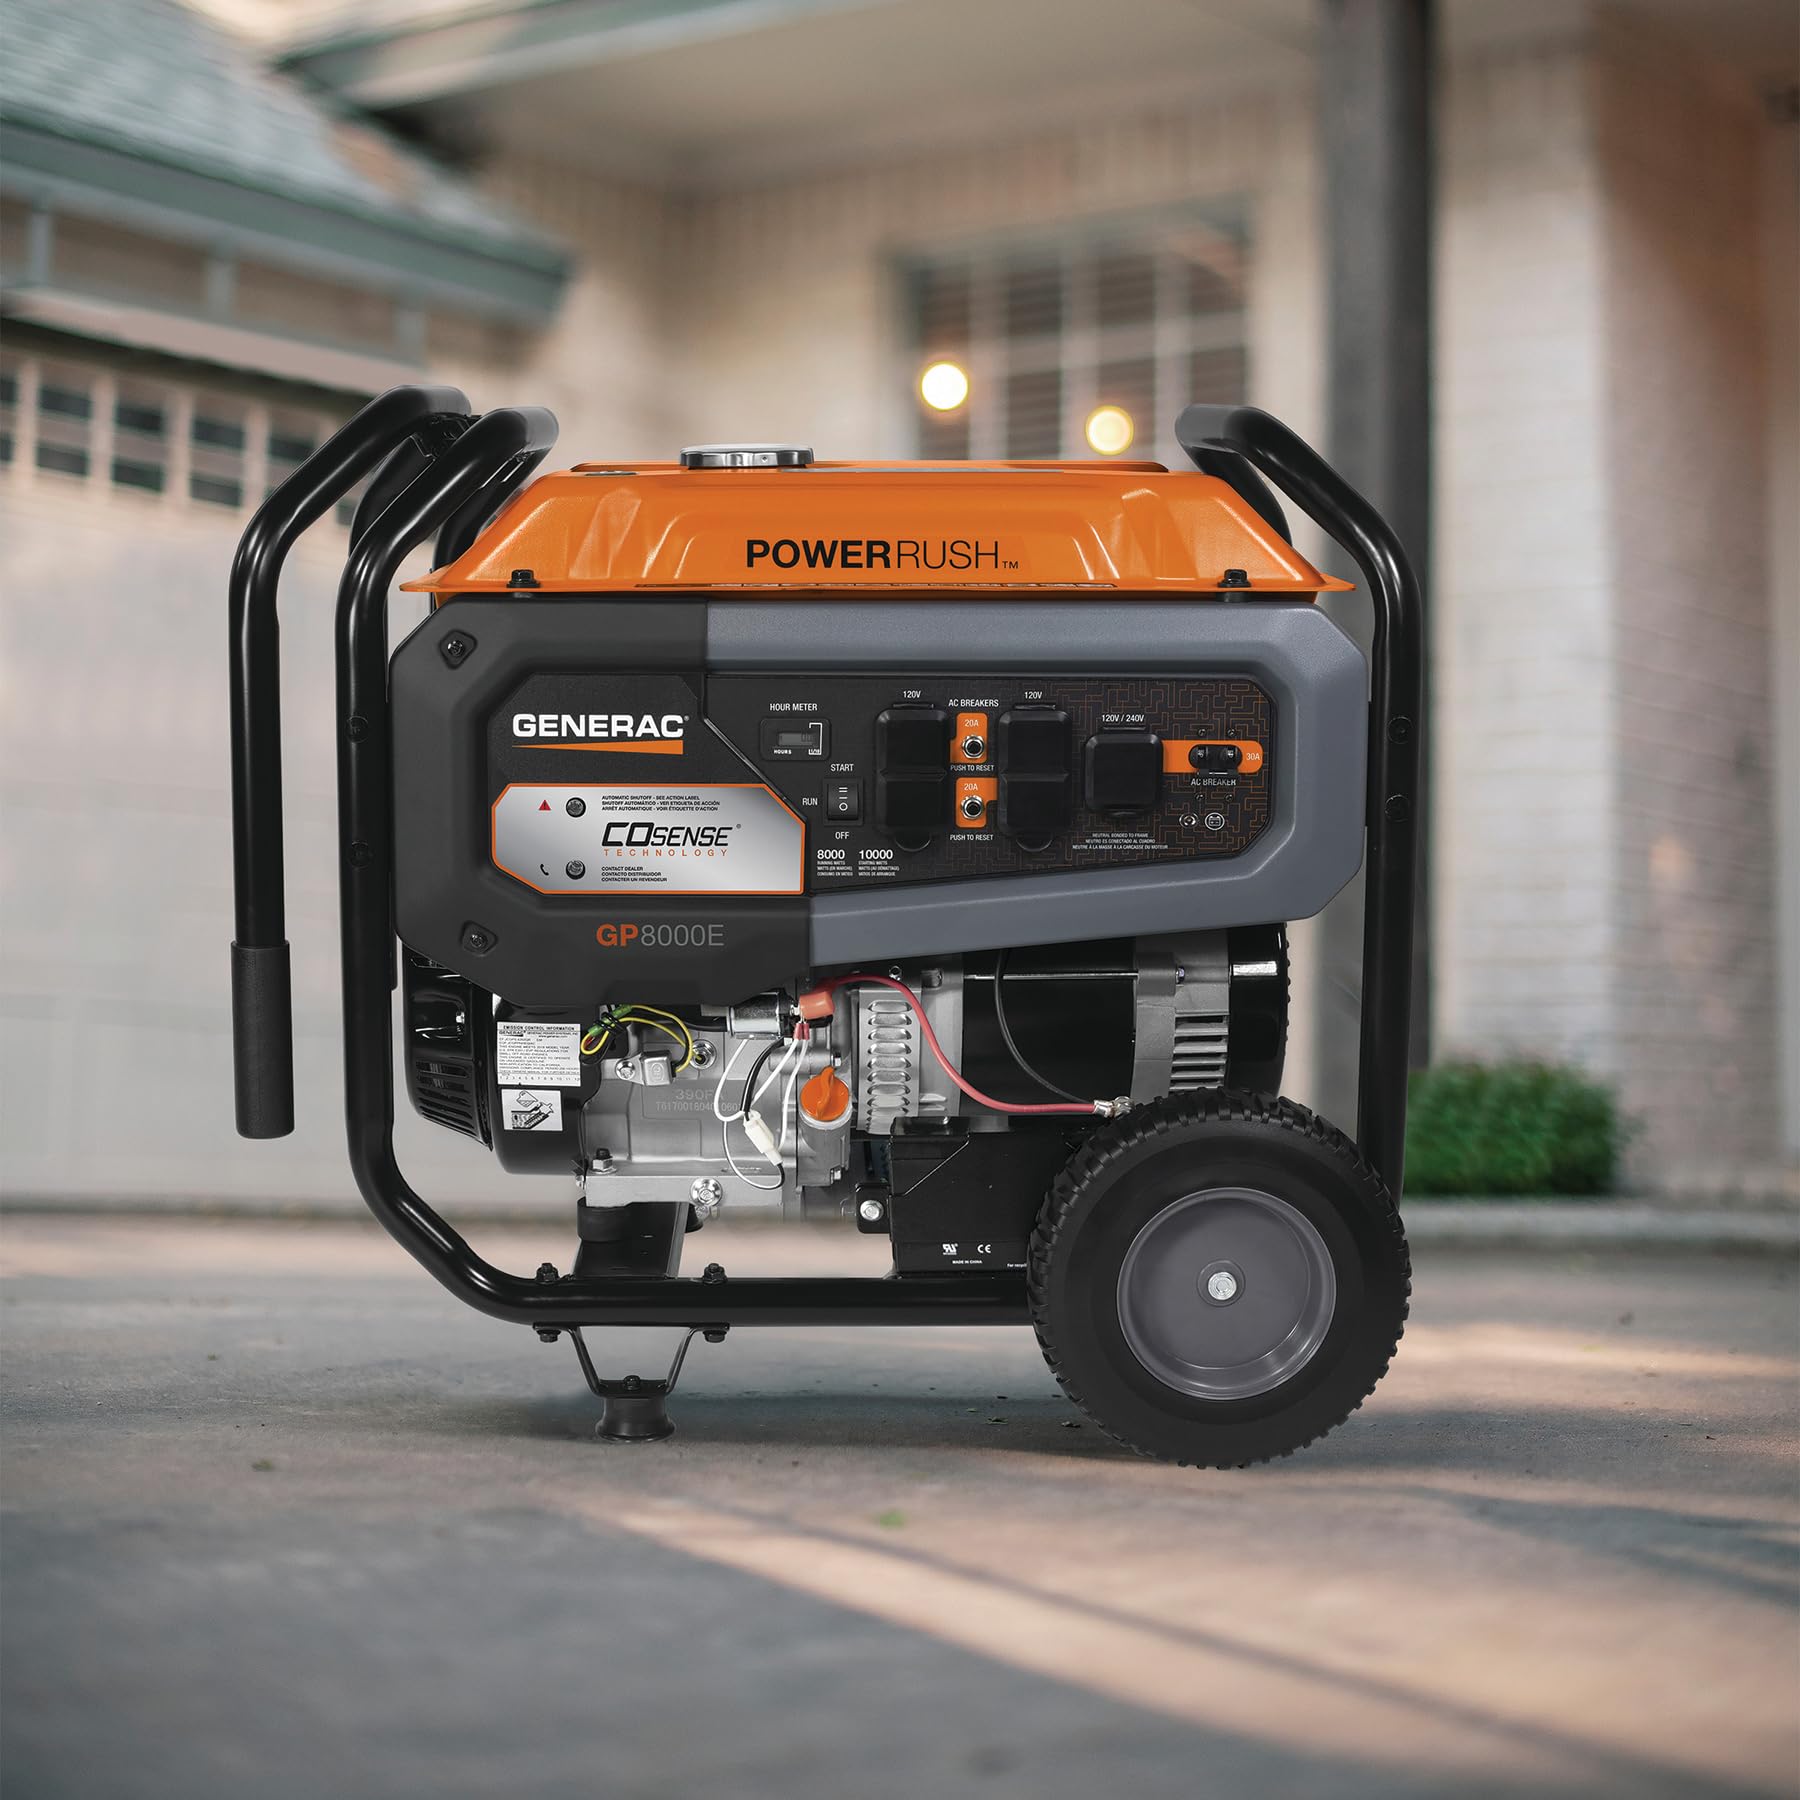 The best portable generator standby solution.